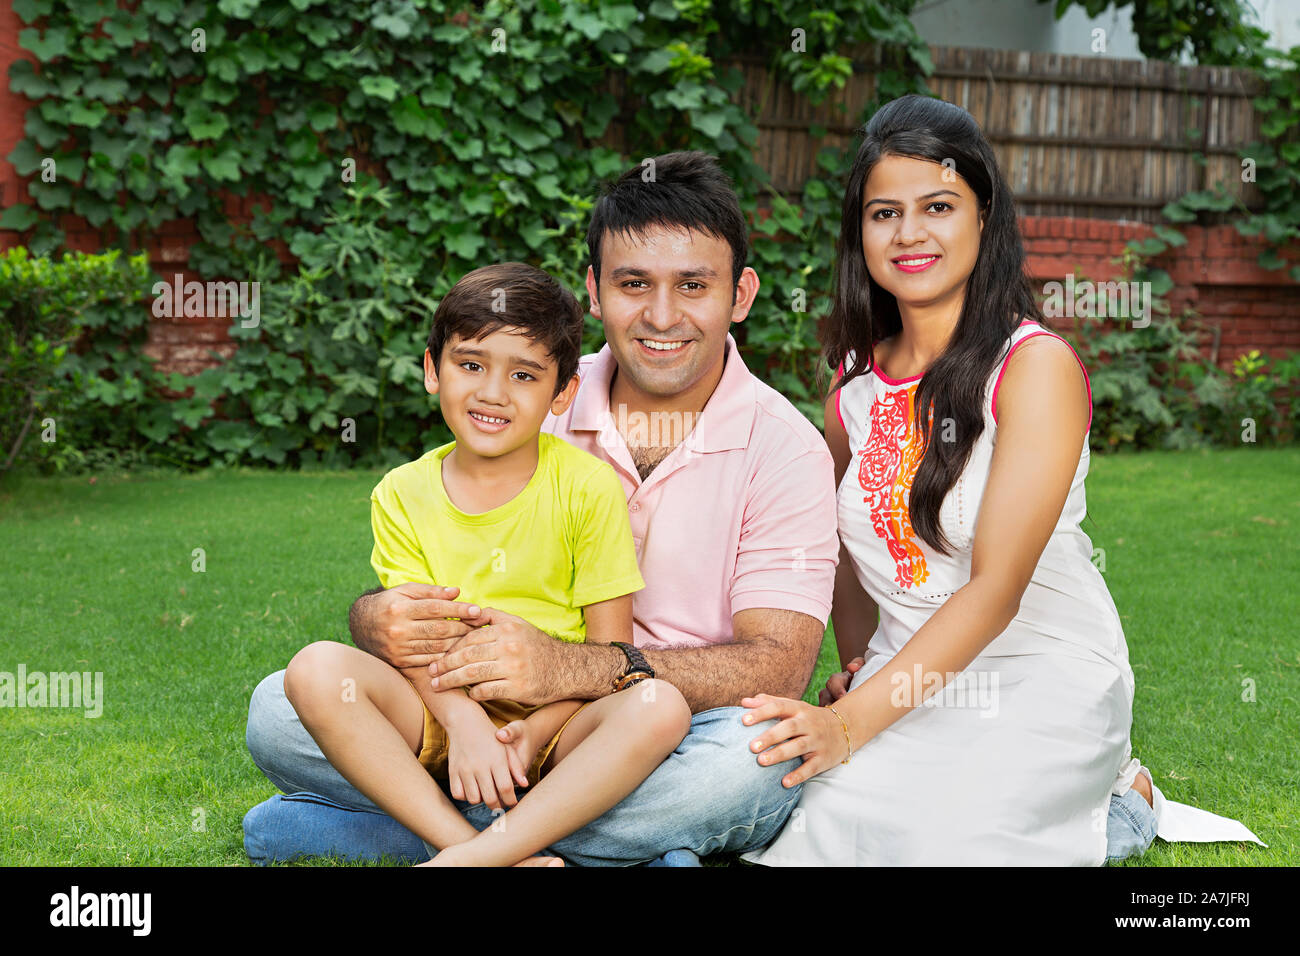 Happy Family Father And Mother With Little son Sitting on the grass and Relaxing At park Stock Photo